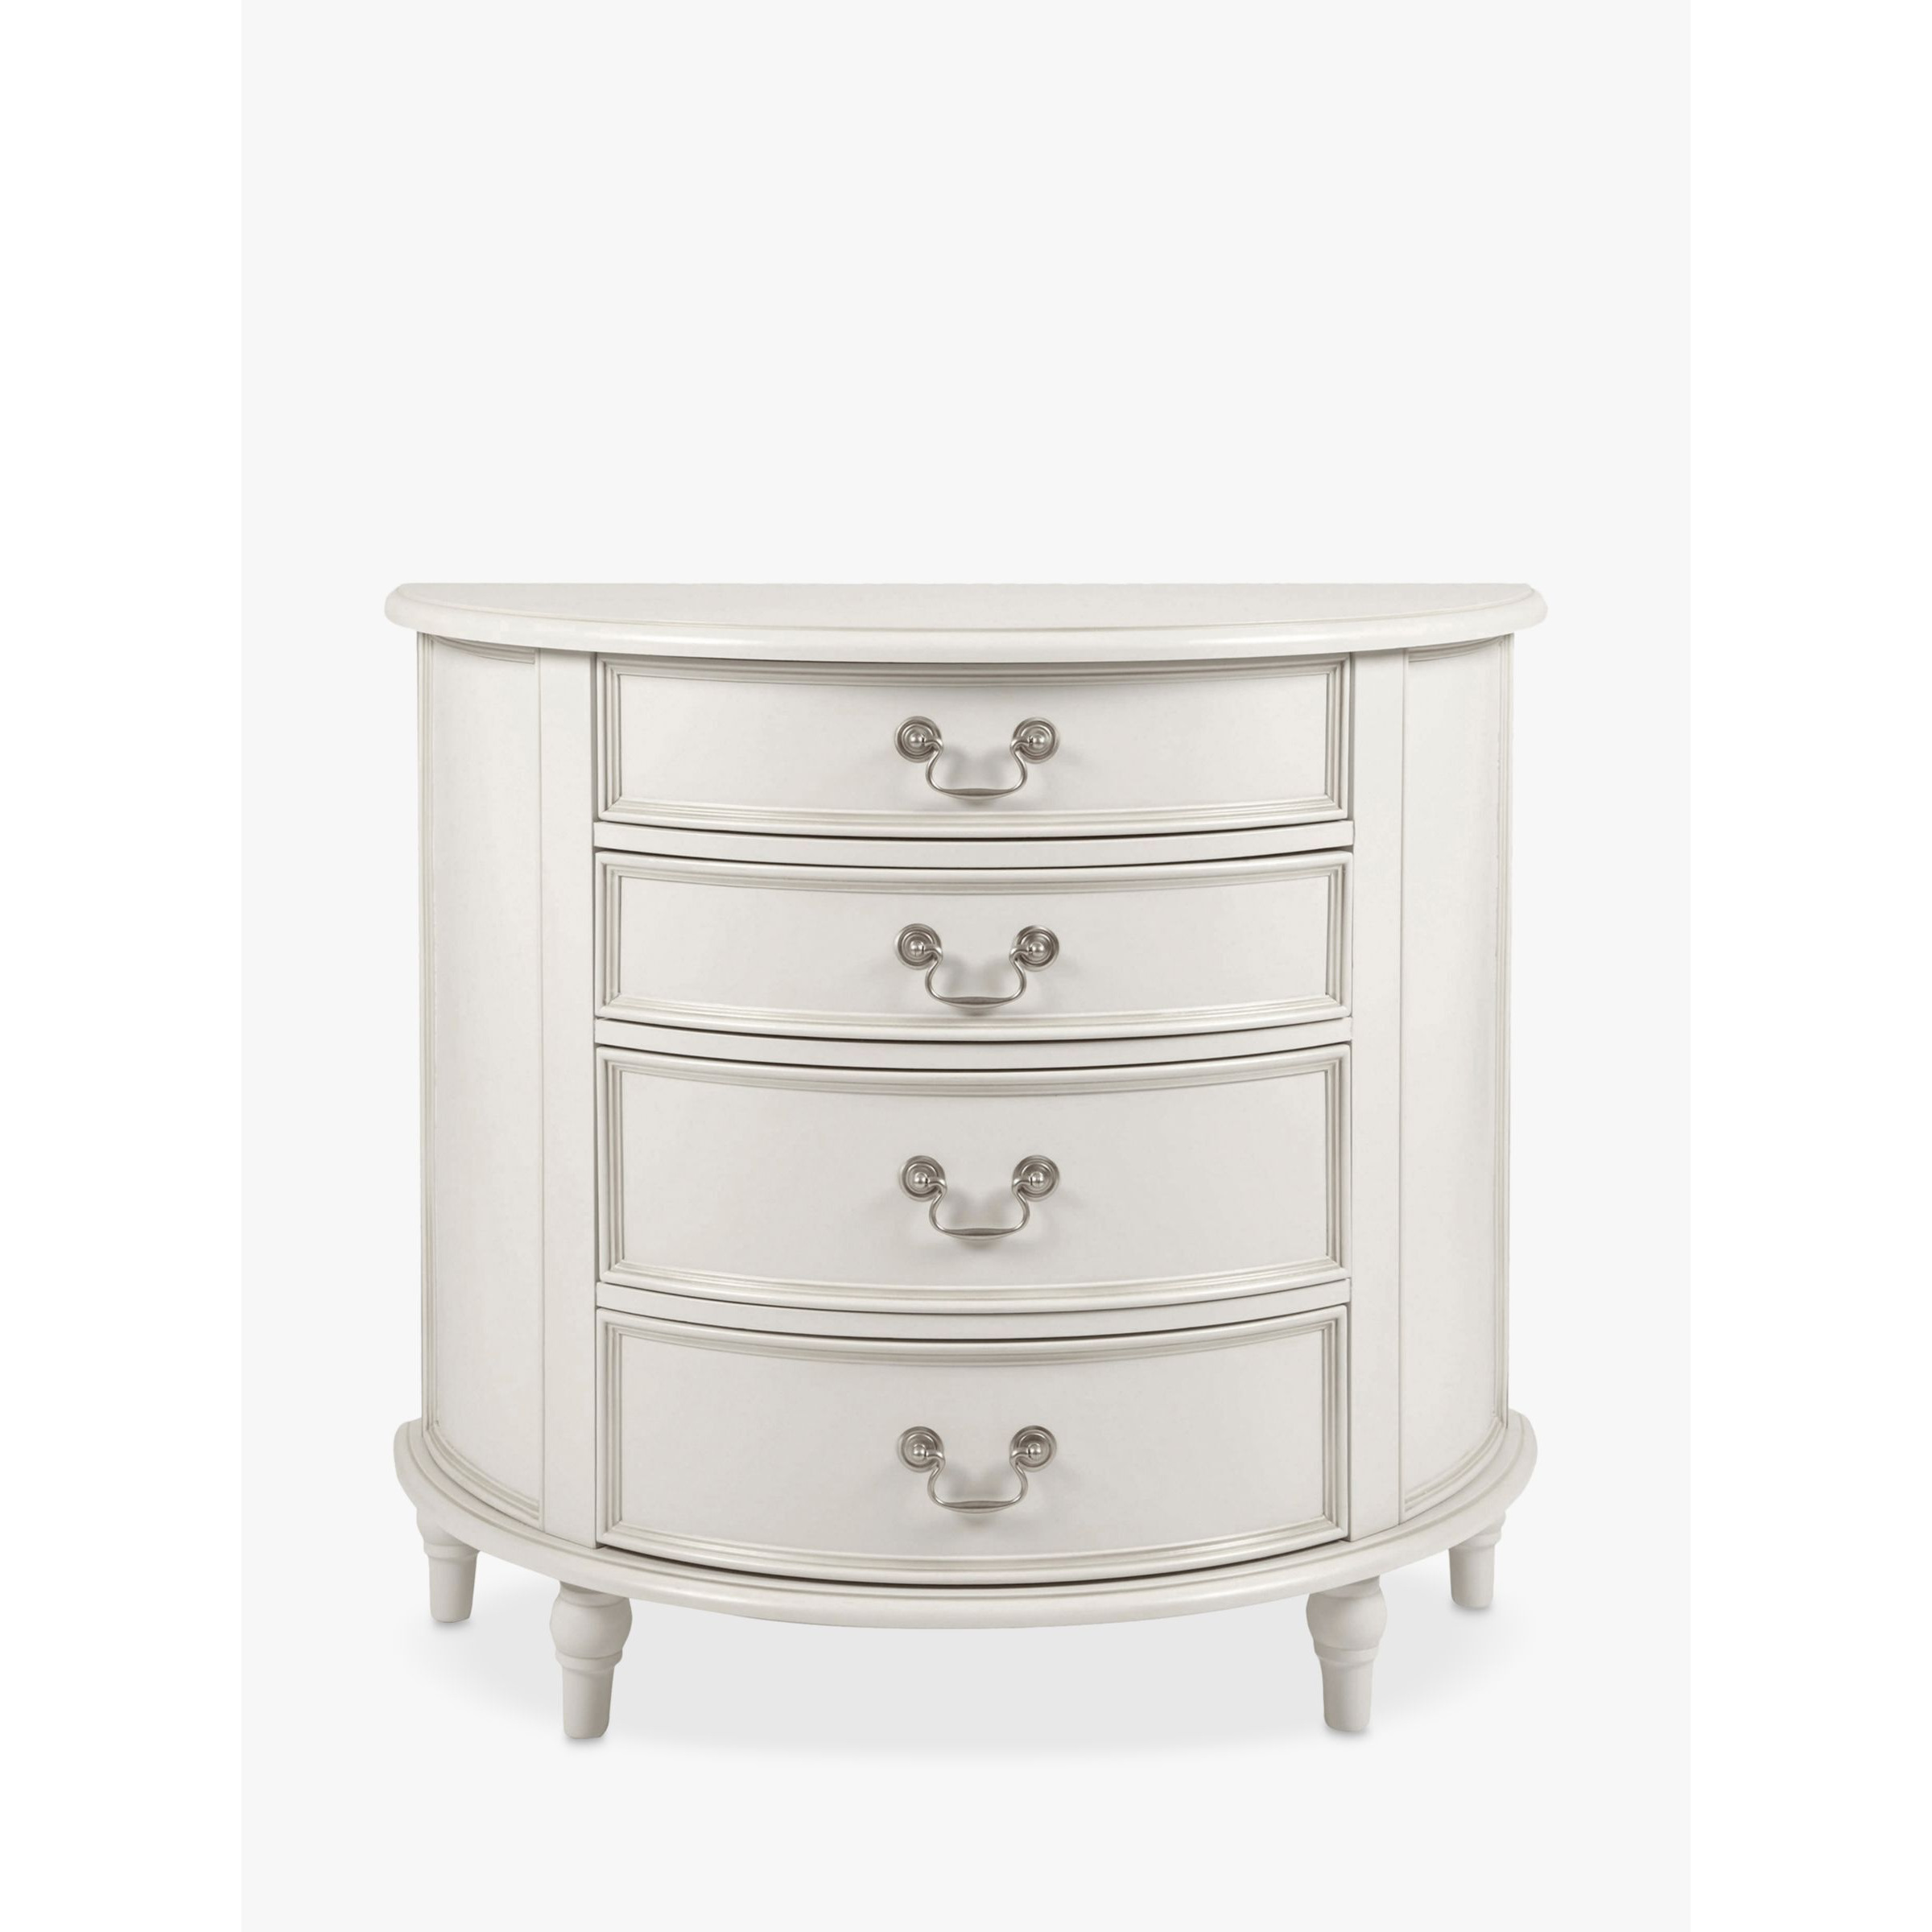 Laura Ashley Clifton 4 Drawer Chest, Grey - image 1